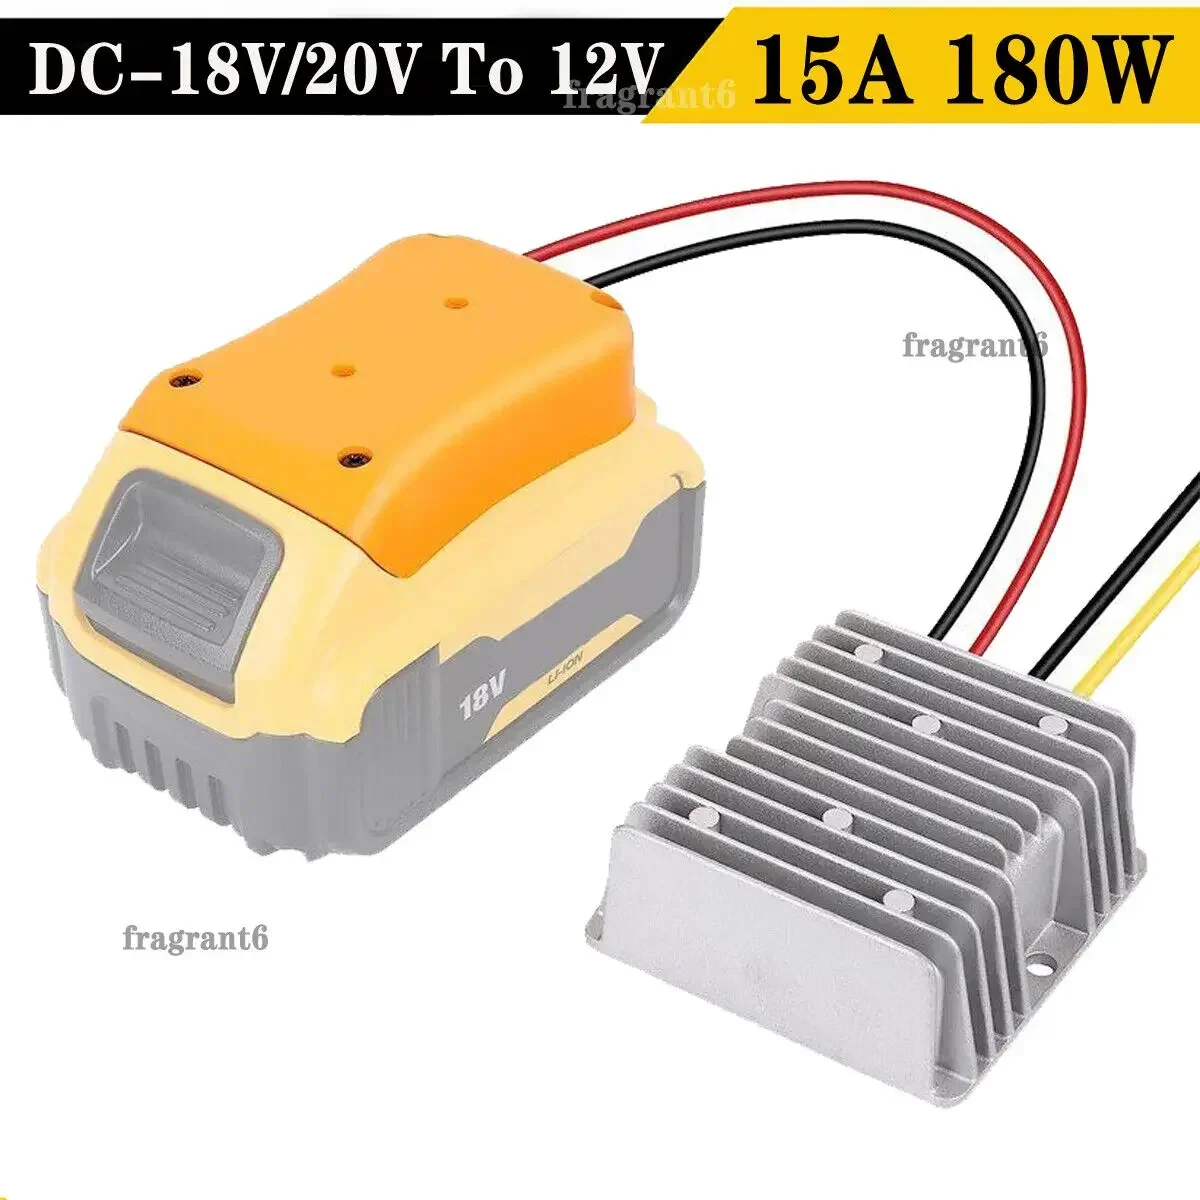 Step Down Converter 20V To 12V Adapter for Dewalt 20V Li-ion Battery 15A 180W Adapter Automatic Buck Boost Converter Regulator foxsur motorcycle battery chargers 12v6a full automatic smart battery chargers maintainer